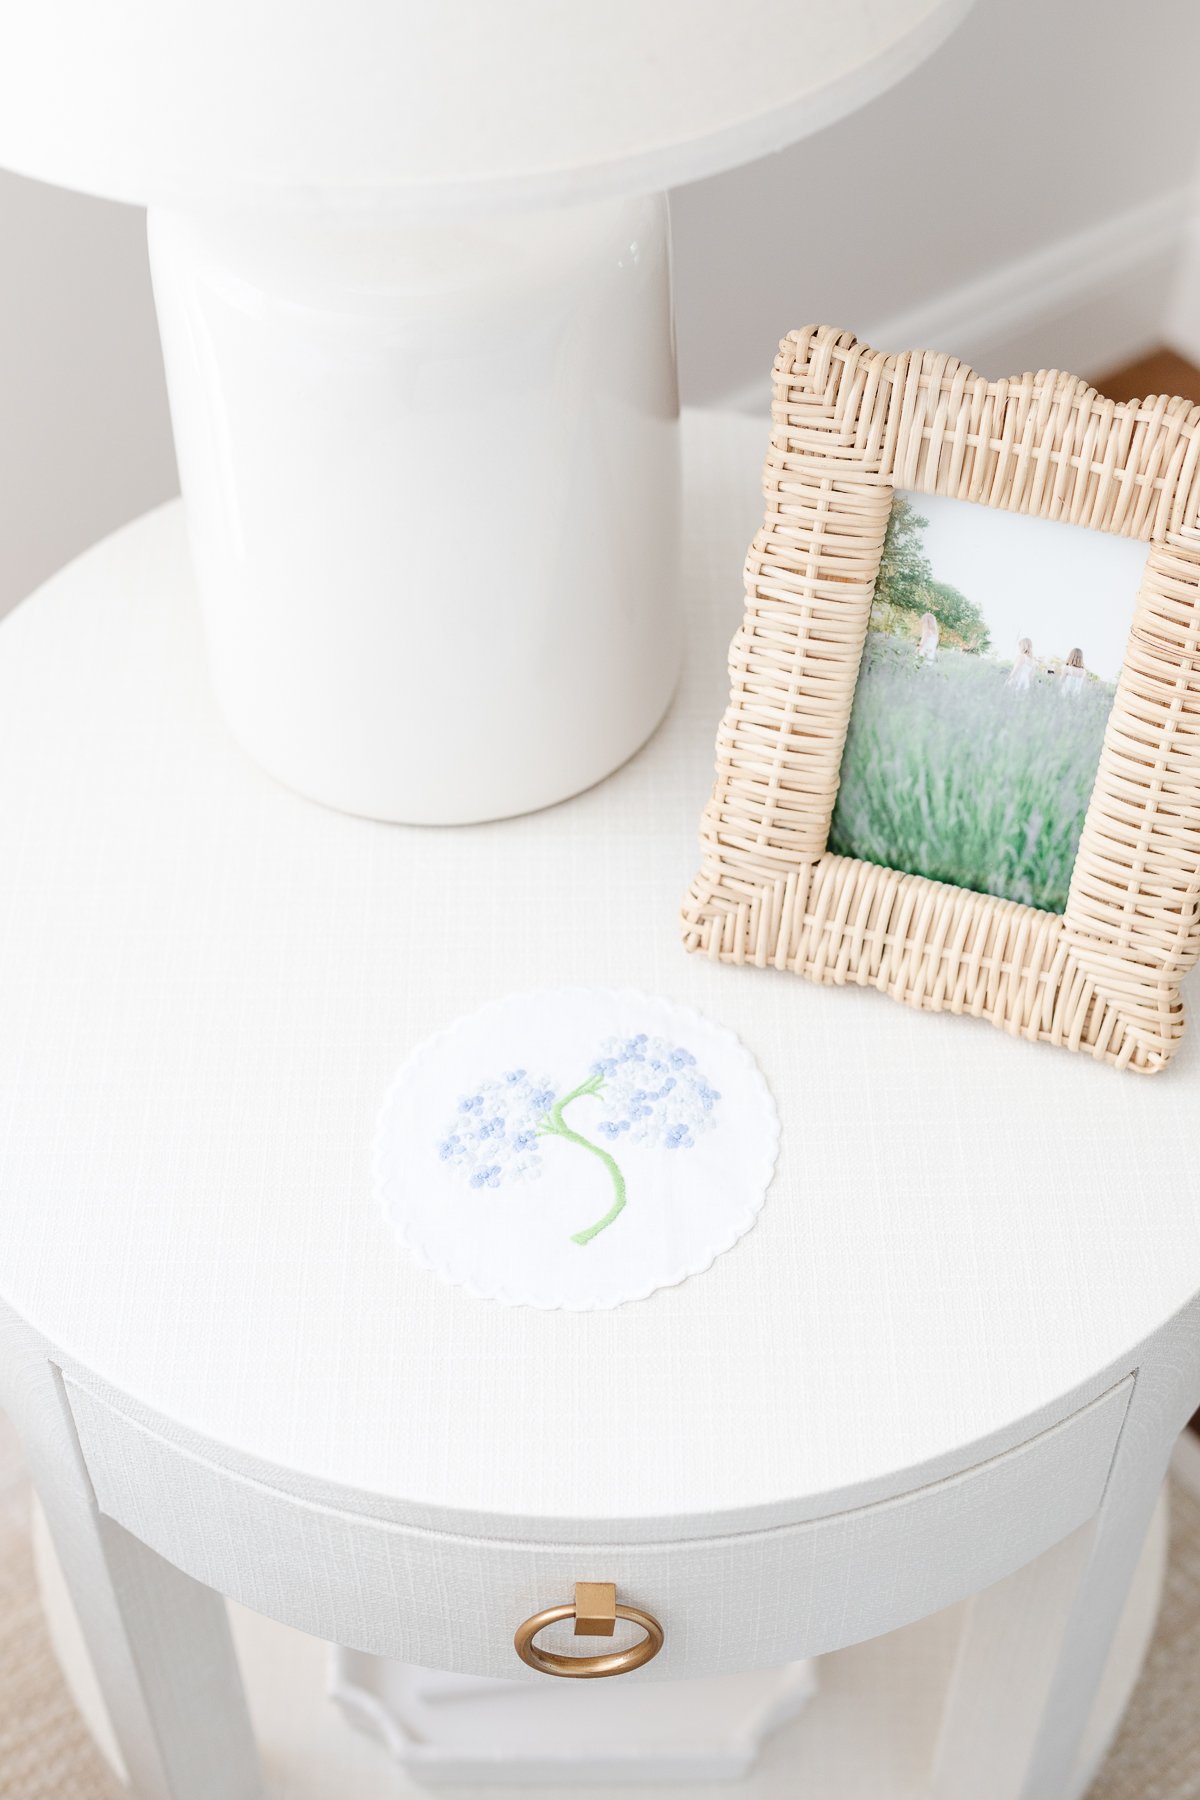 A white nightstand with scalloped decor and a picture of a flower on it.